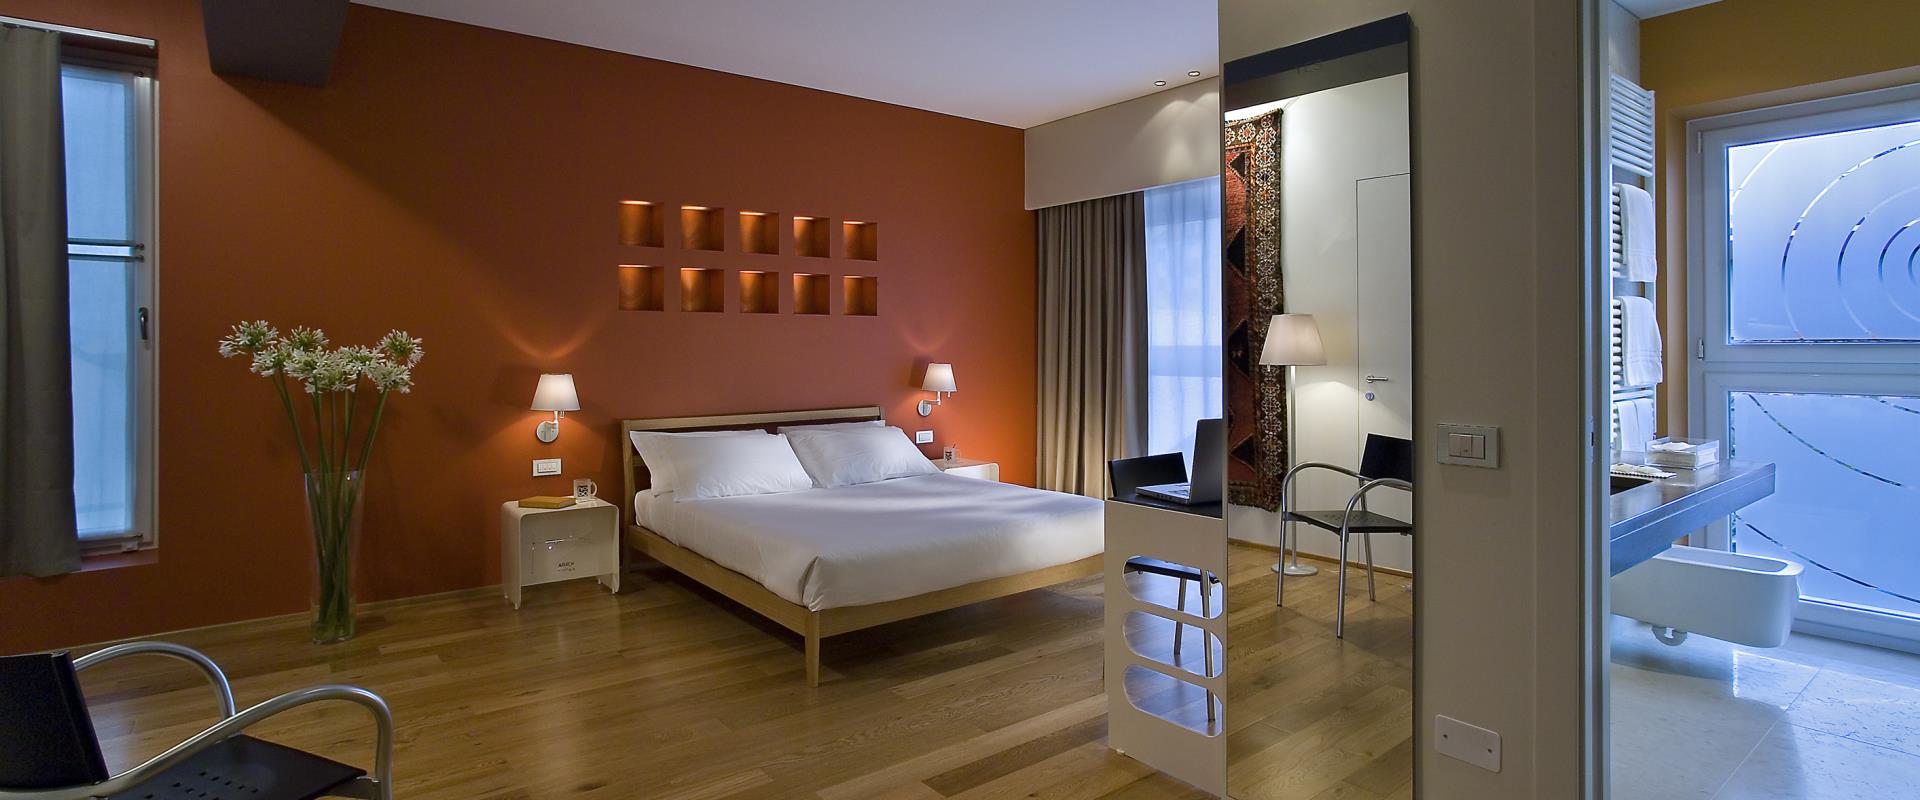 Discover the comfort of the rooms of BW Plus Hotel Bologna,4-star hotel near Venice. Choose the room type that suits you best!